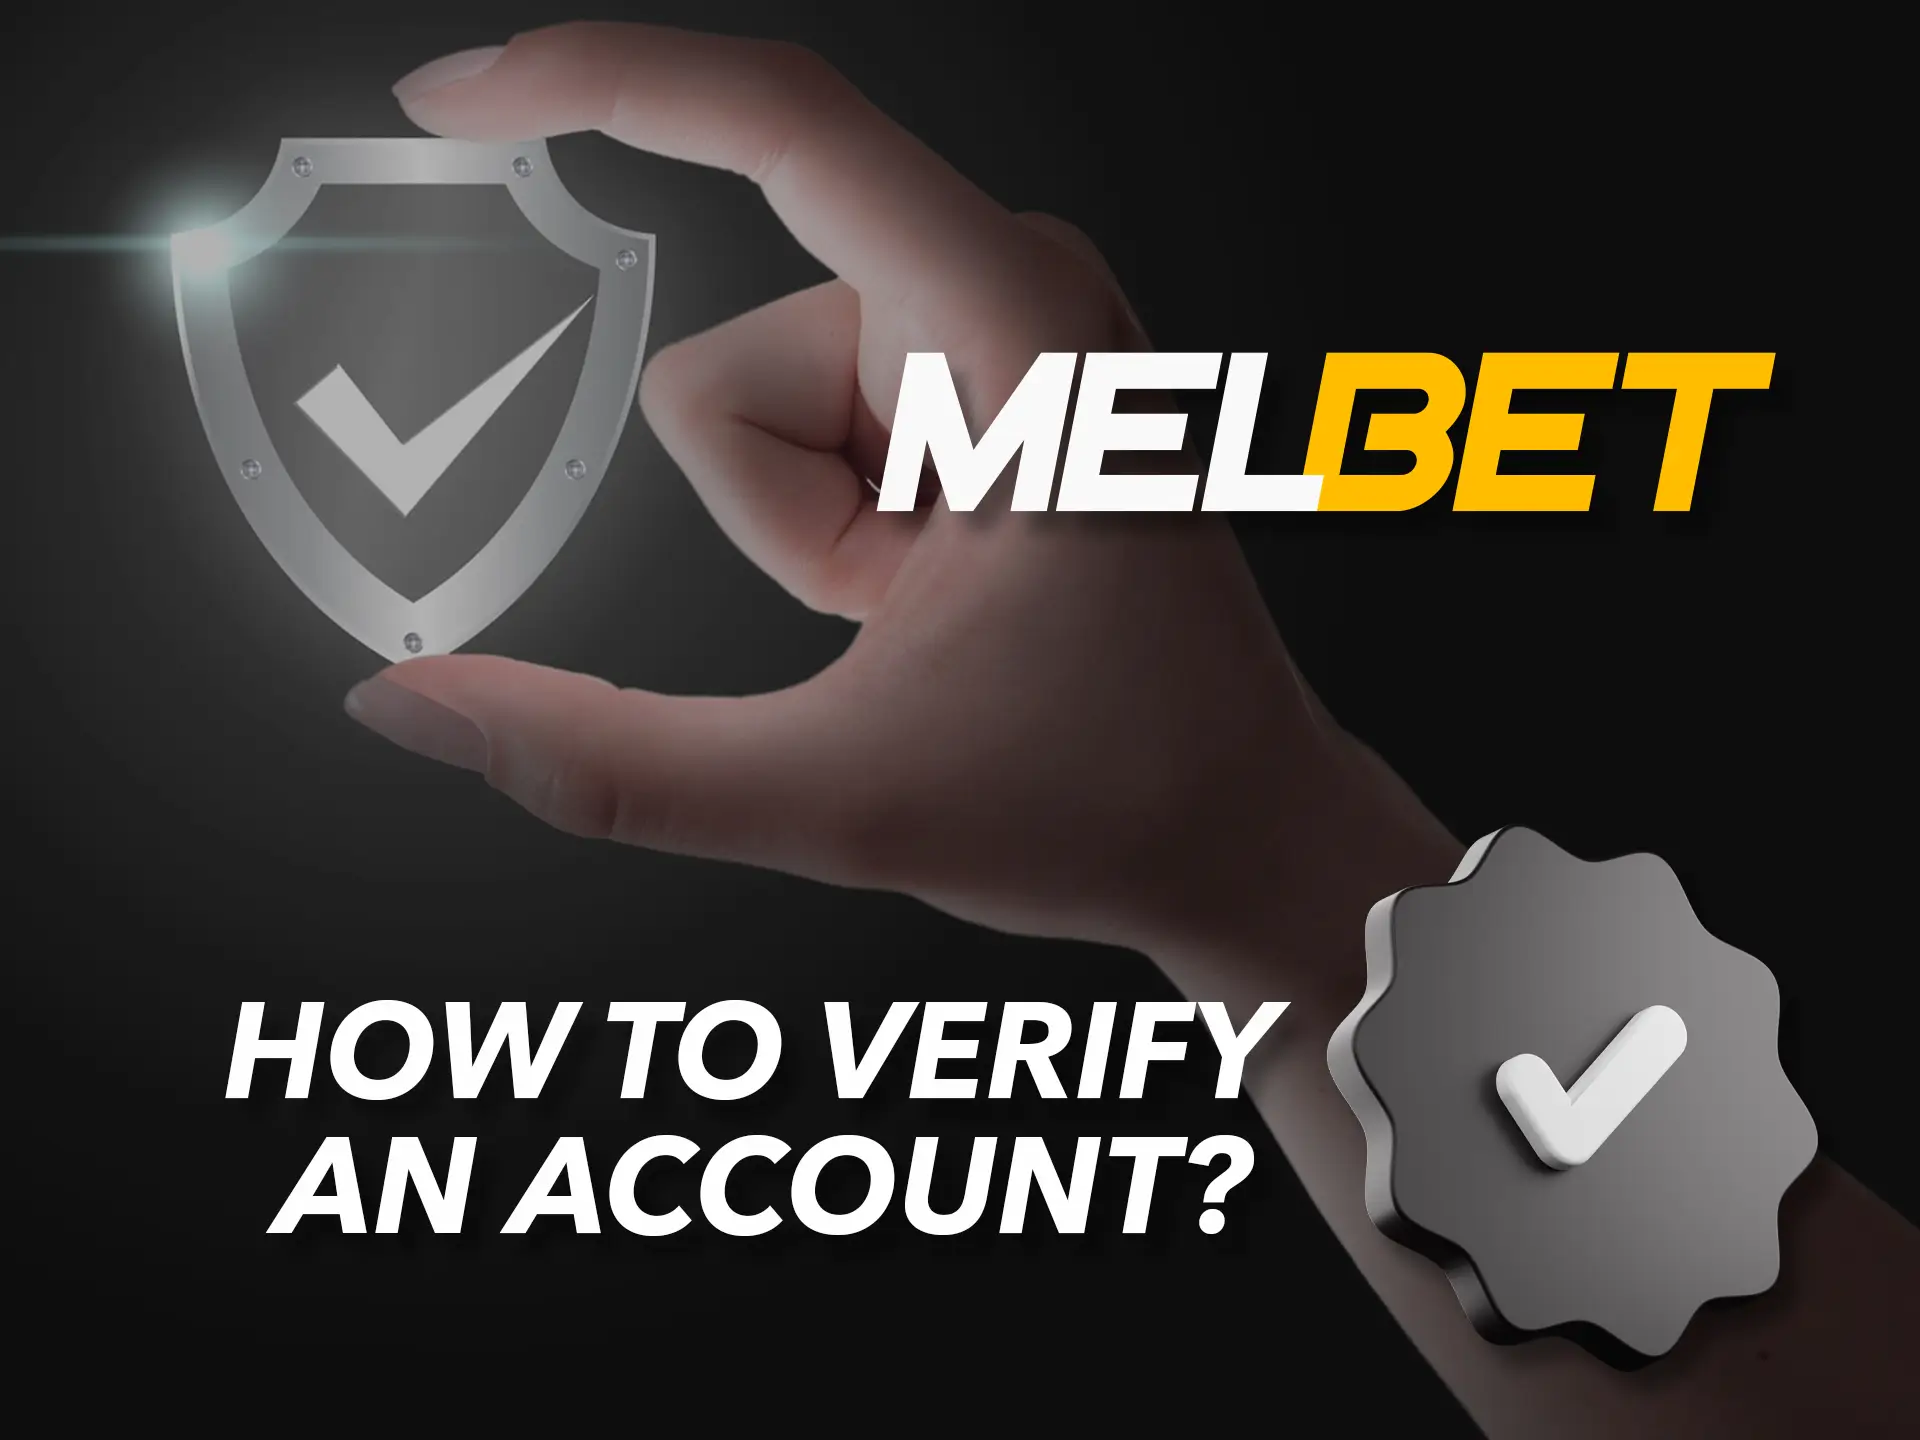 Confirm your Melbet account to get all the features you need.